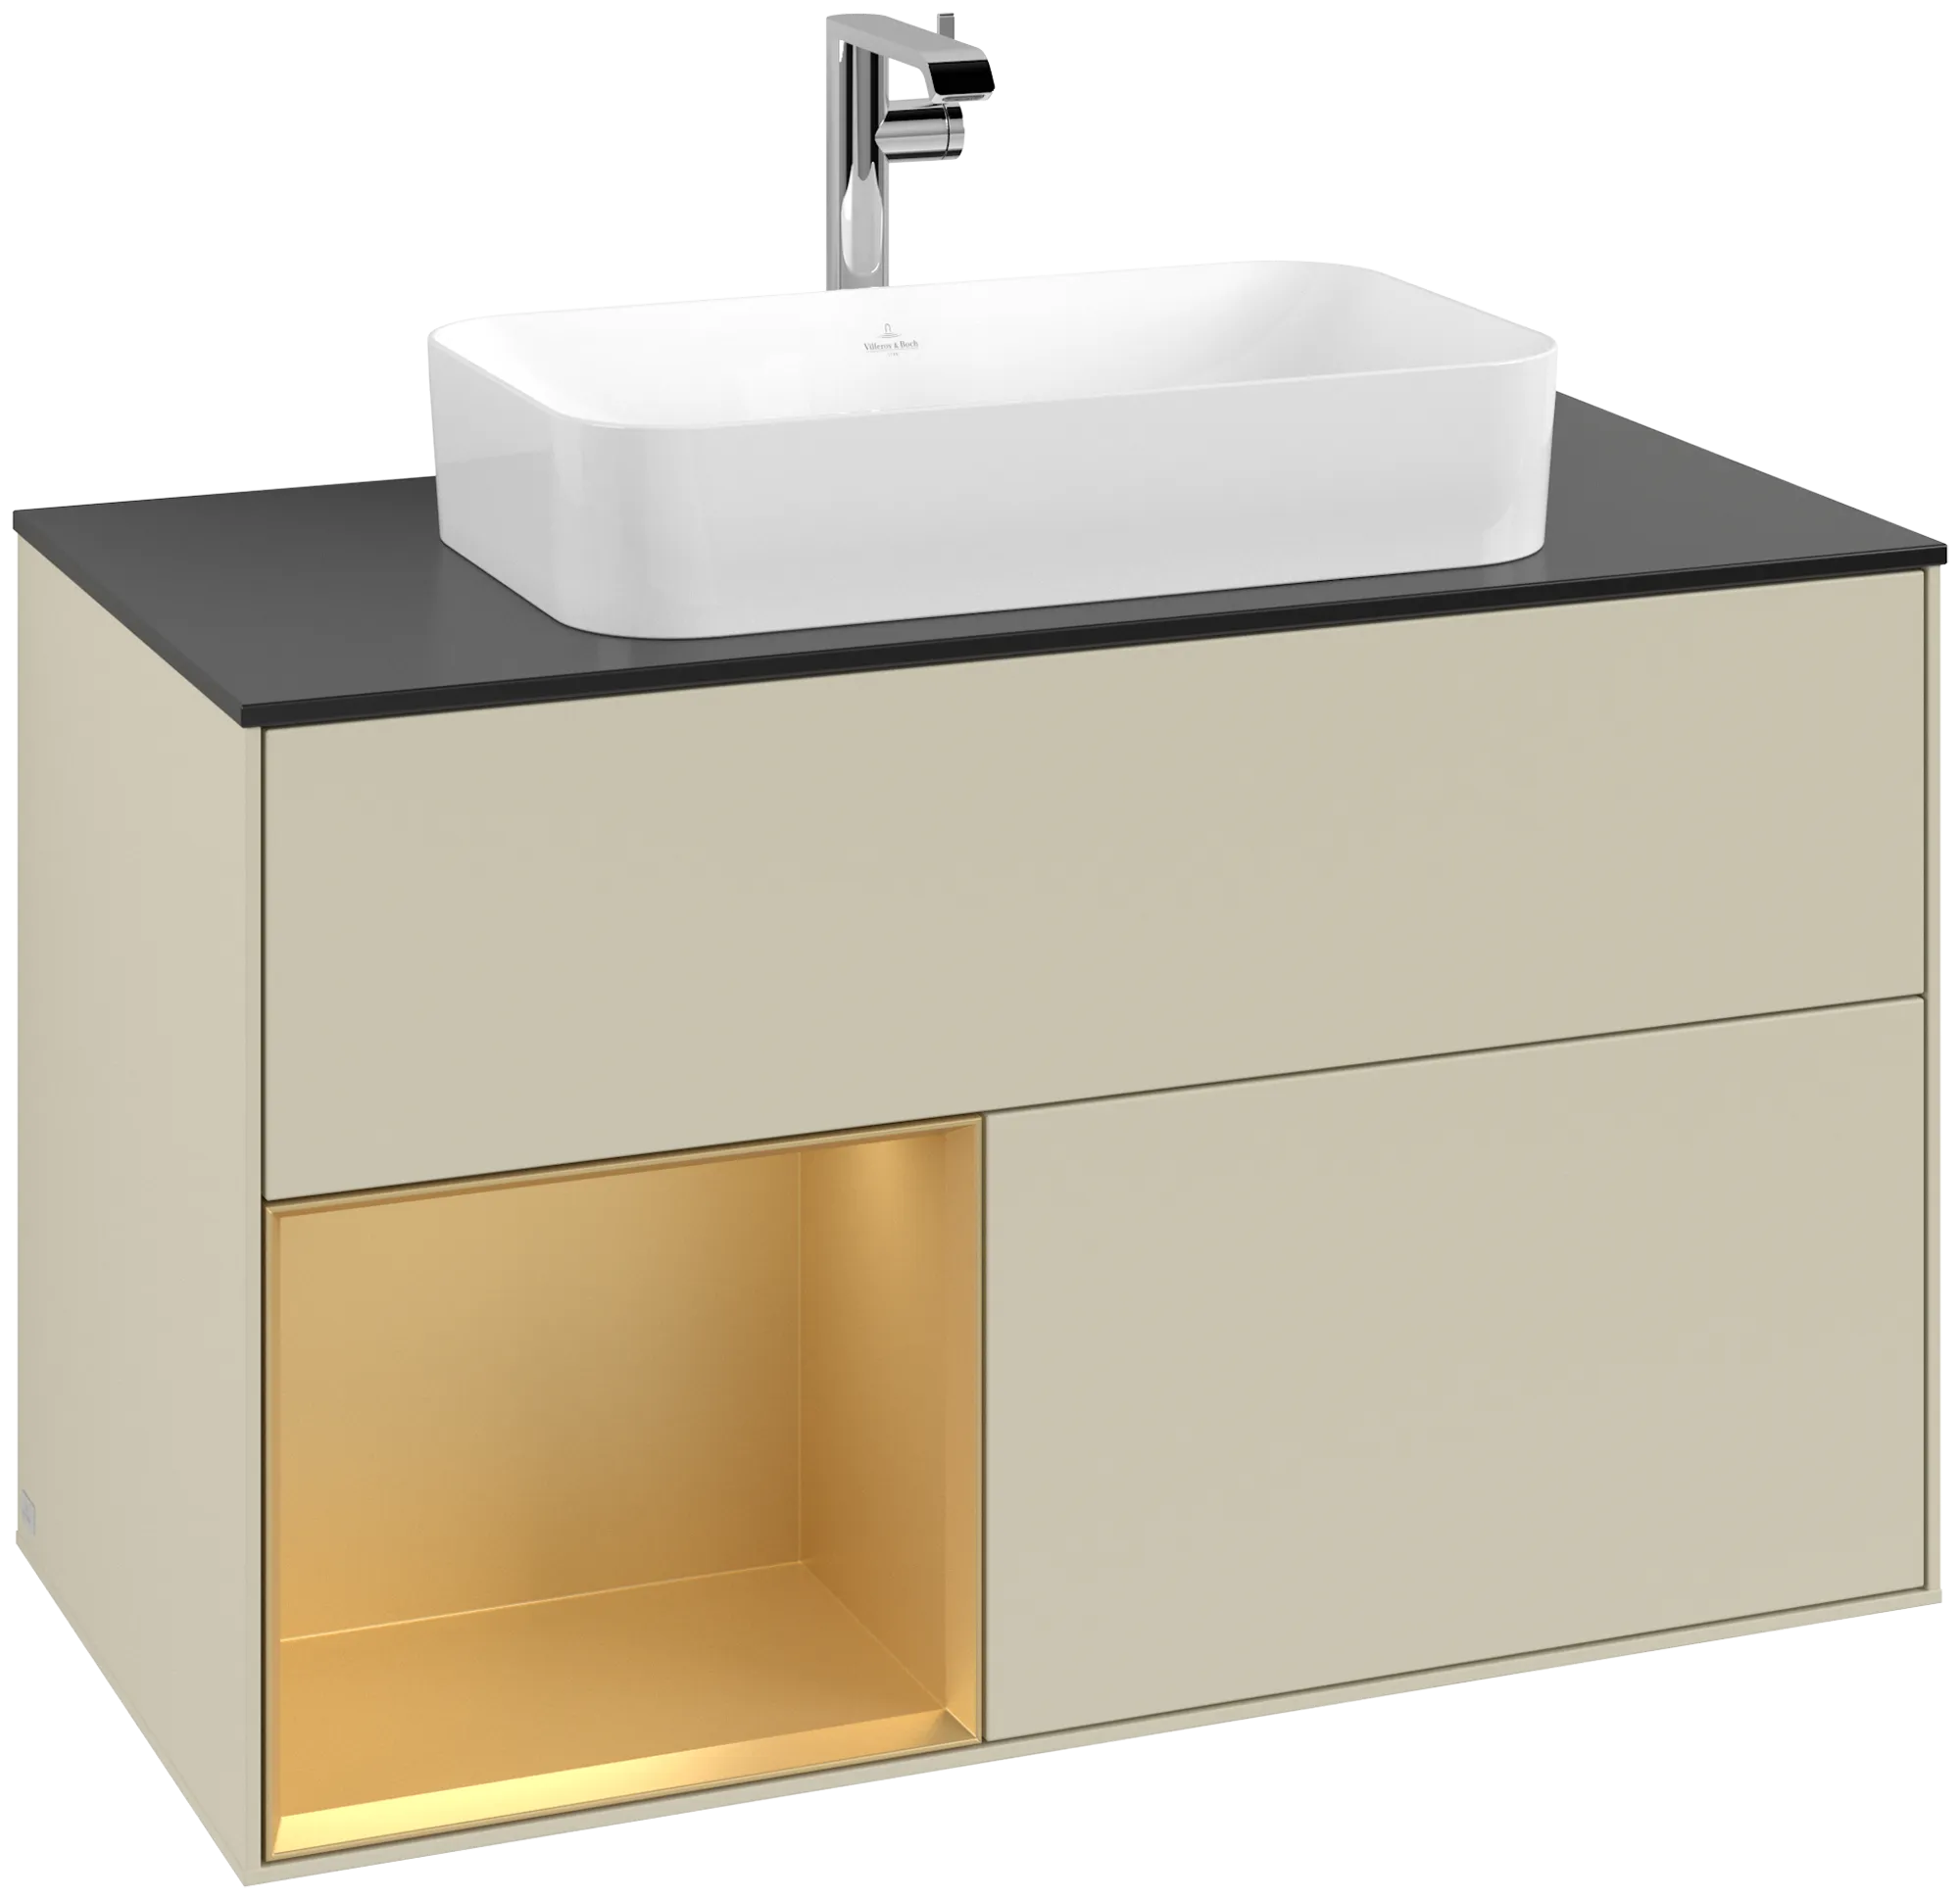 Picture of VILLEROY BOCH Finion Vanity unit, with lighting, 2 pull-out compartments, 1000 x 603 x 501 mm, Silk Grey Matt Lacquer / Gold Matt Lacquer / Glass Black Matt #G242HFHJ